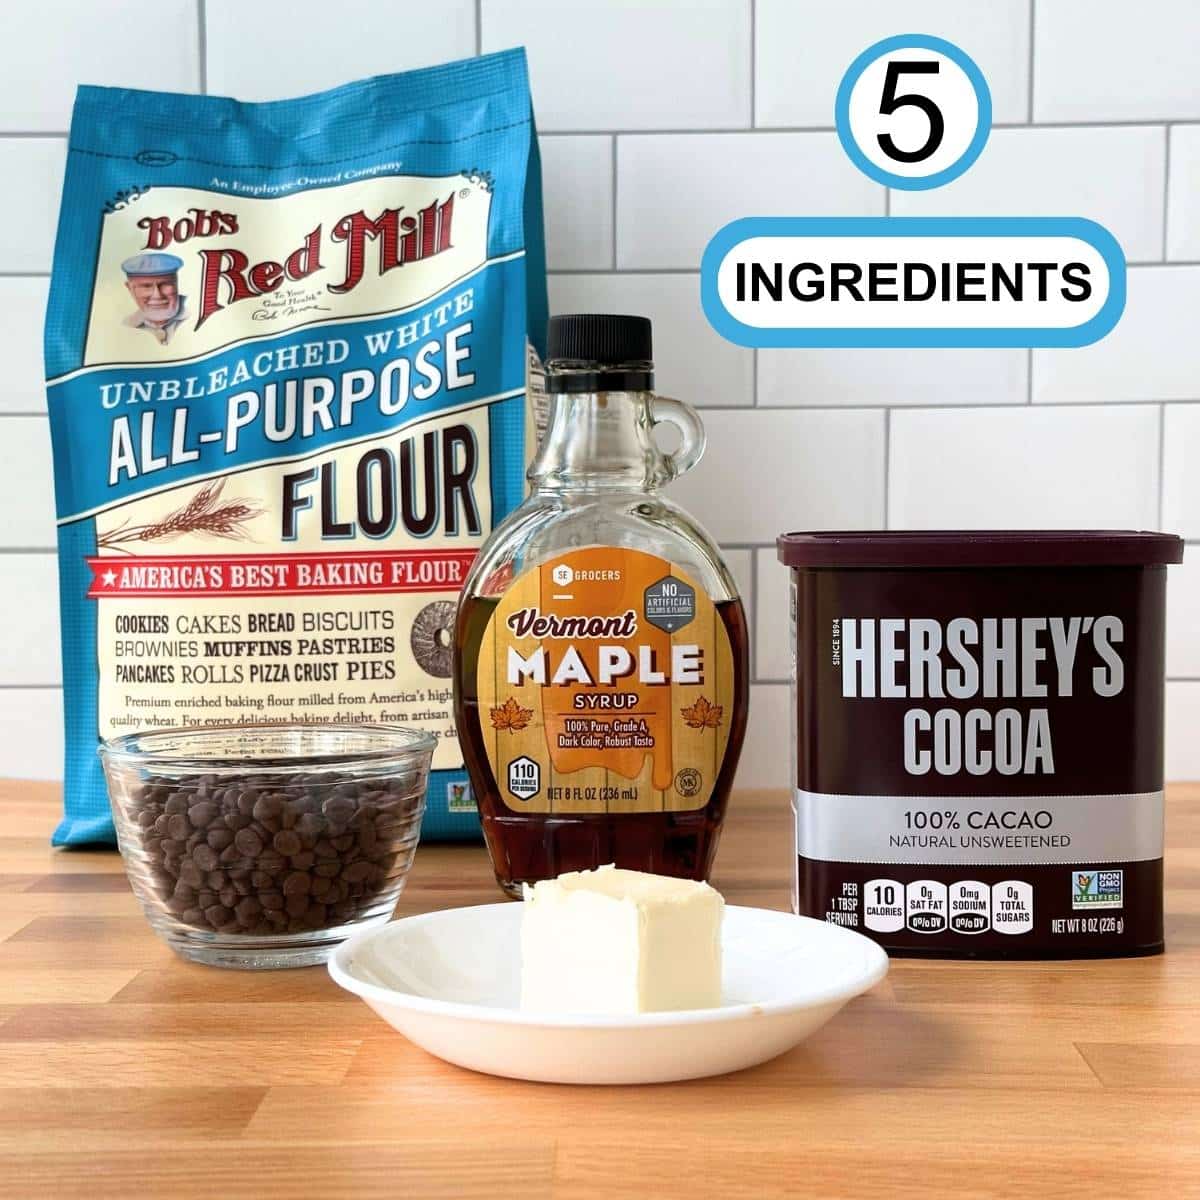 Picture of ingredients for vegan mug brownie recipe: Bag of all purpose flour, bowl of mini chocolate chips, bottle of maple syrup, cocoa powder, and stick of butter on white plate. Text reads "5 INGREDIENTS" in black on white bubble with blue border.